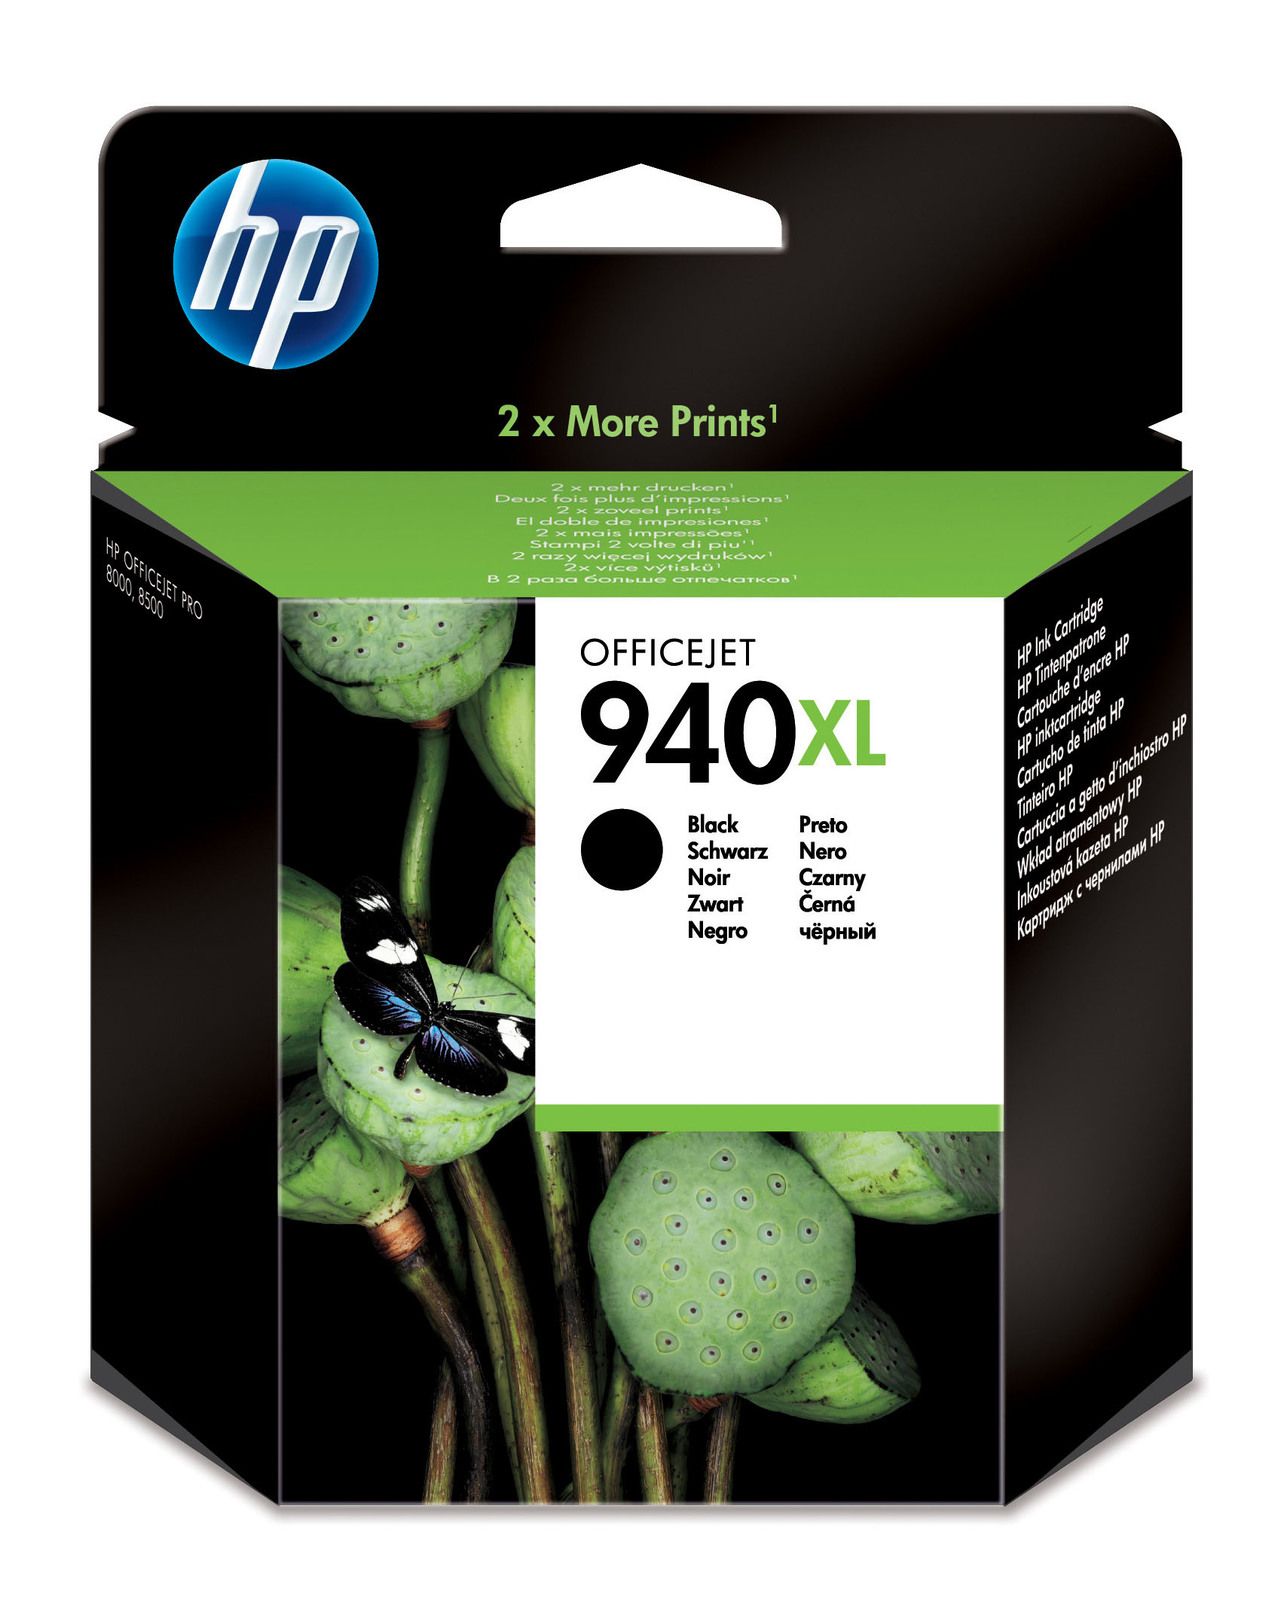 Related to HP CB092A Ink: C4906AE